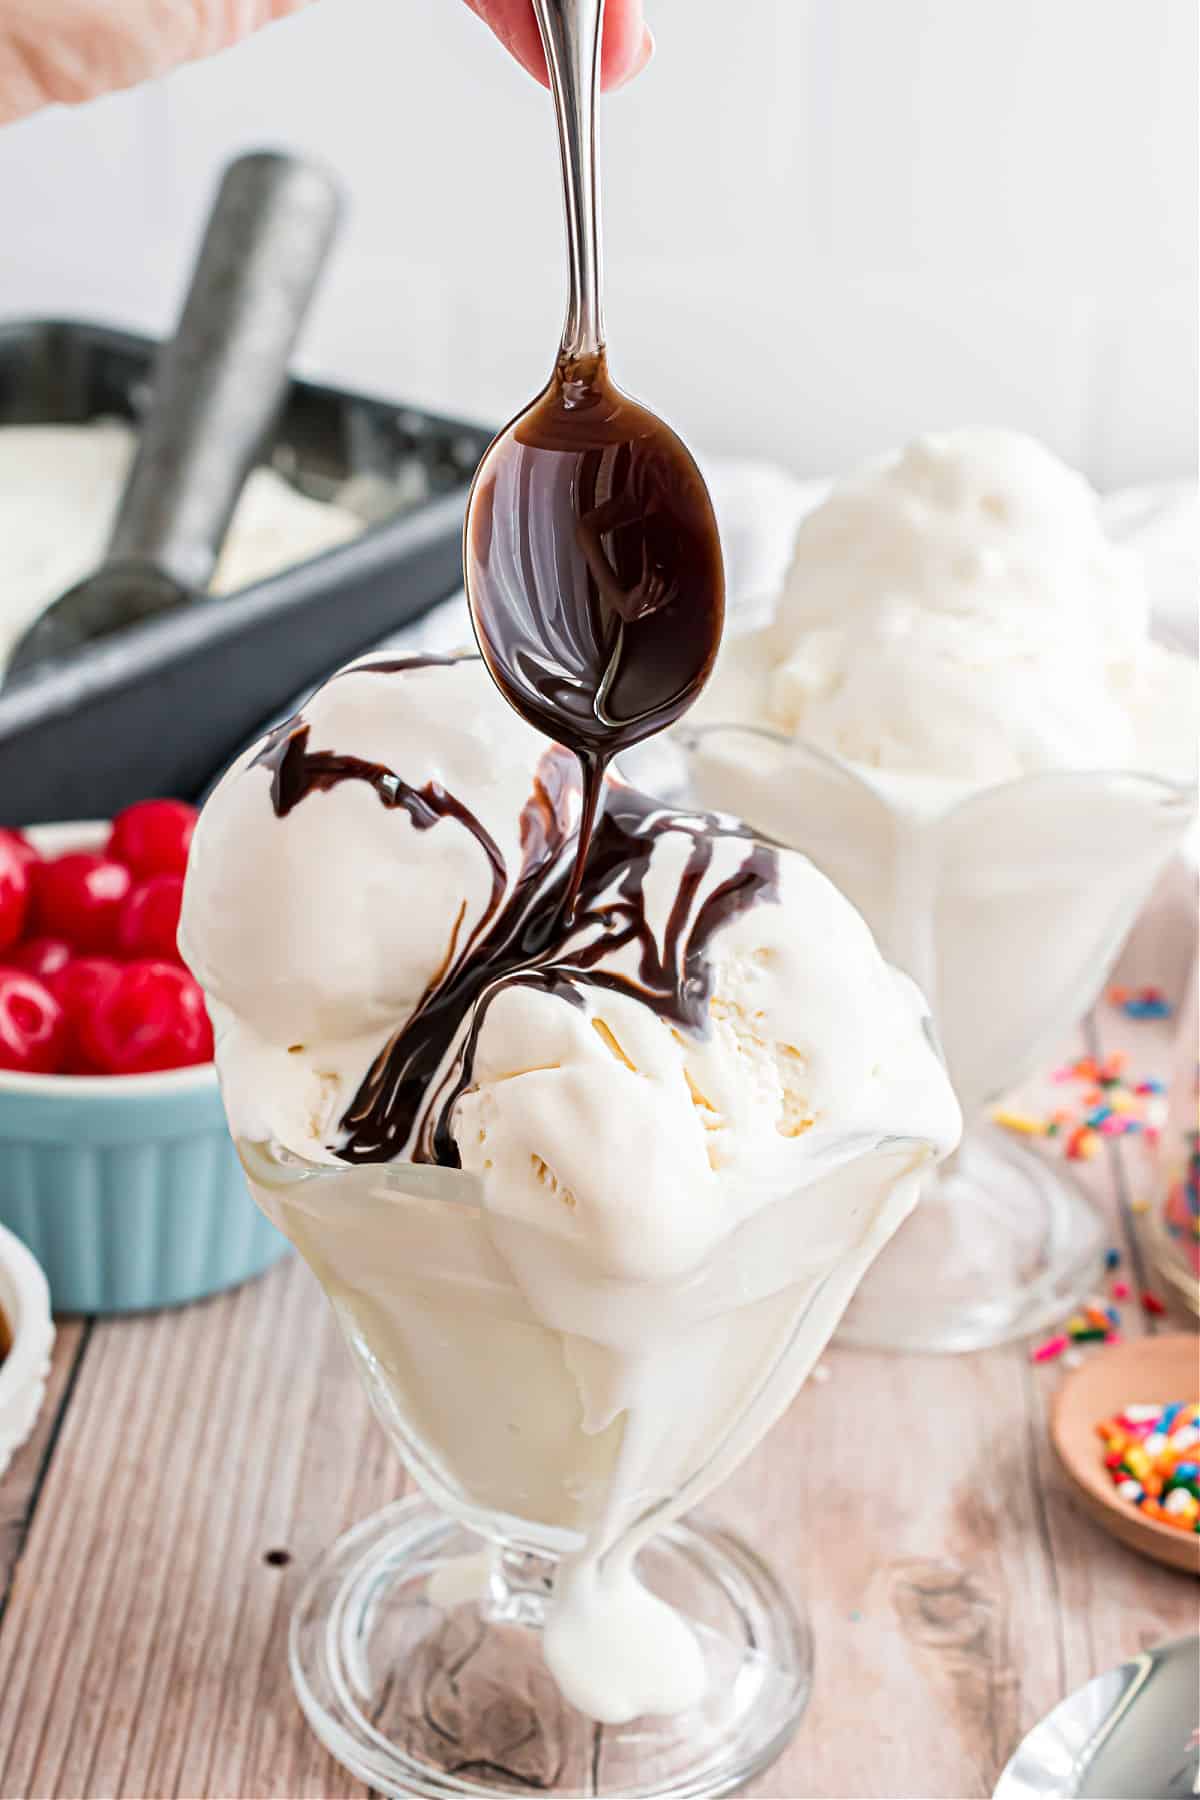 Chocolate syrup being drizzled over a dish of vanilla ice cream.